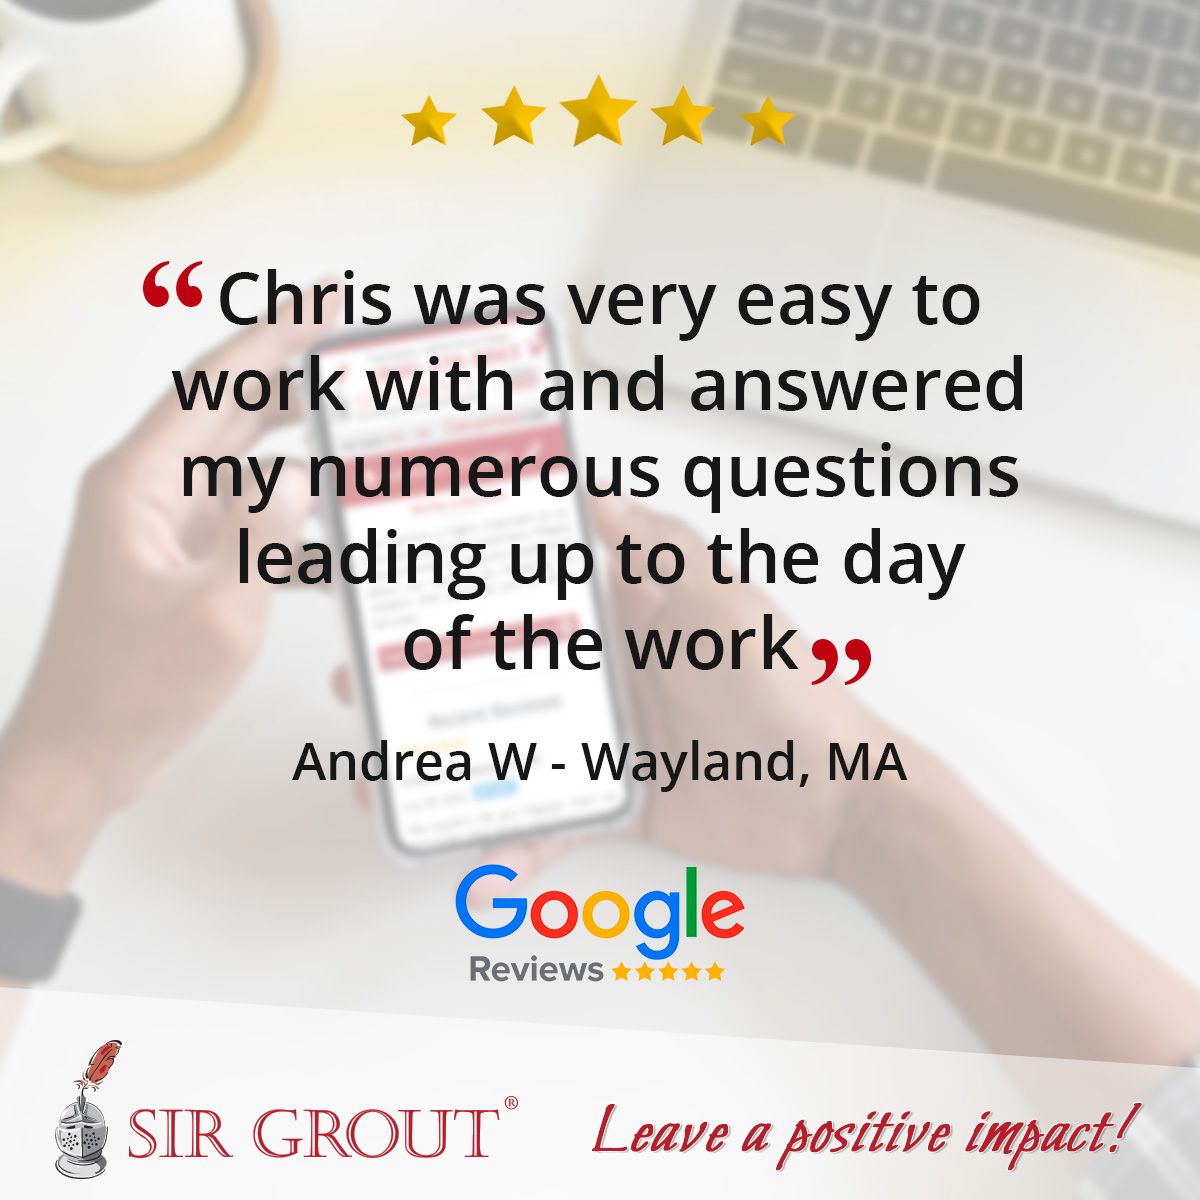 Chris was very easy to work with and answered my numerous questions leading up to the day of the work